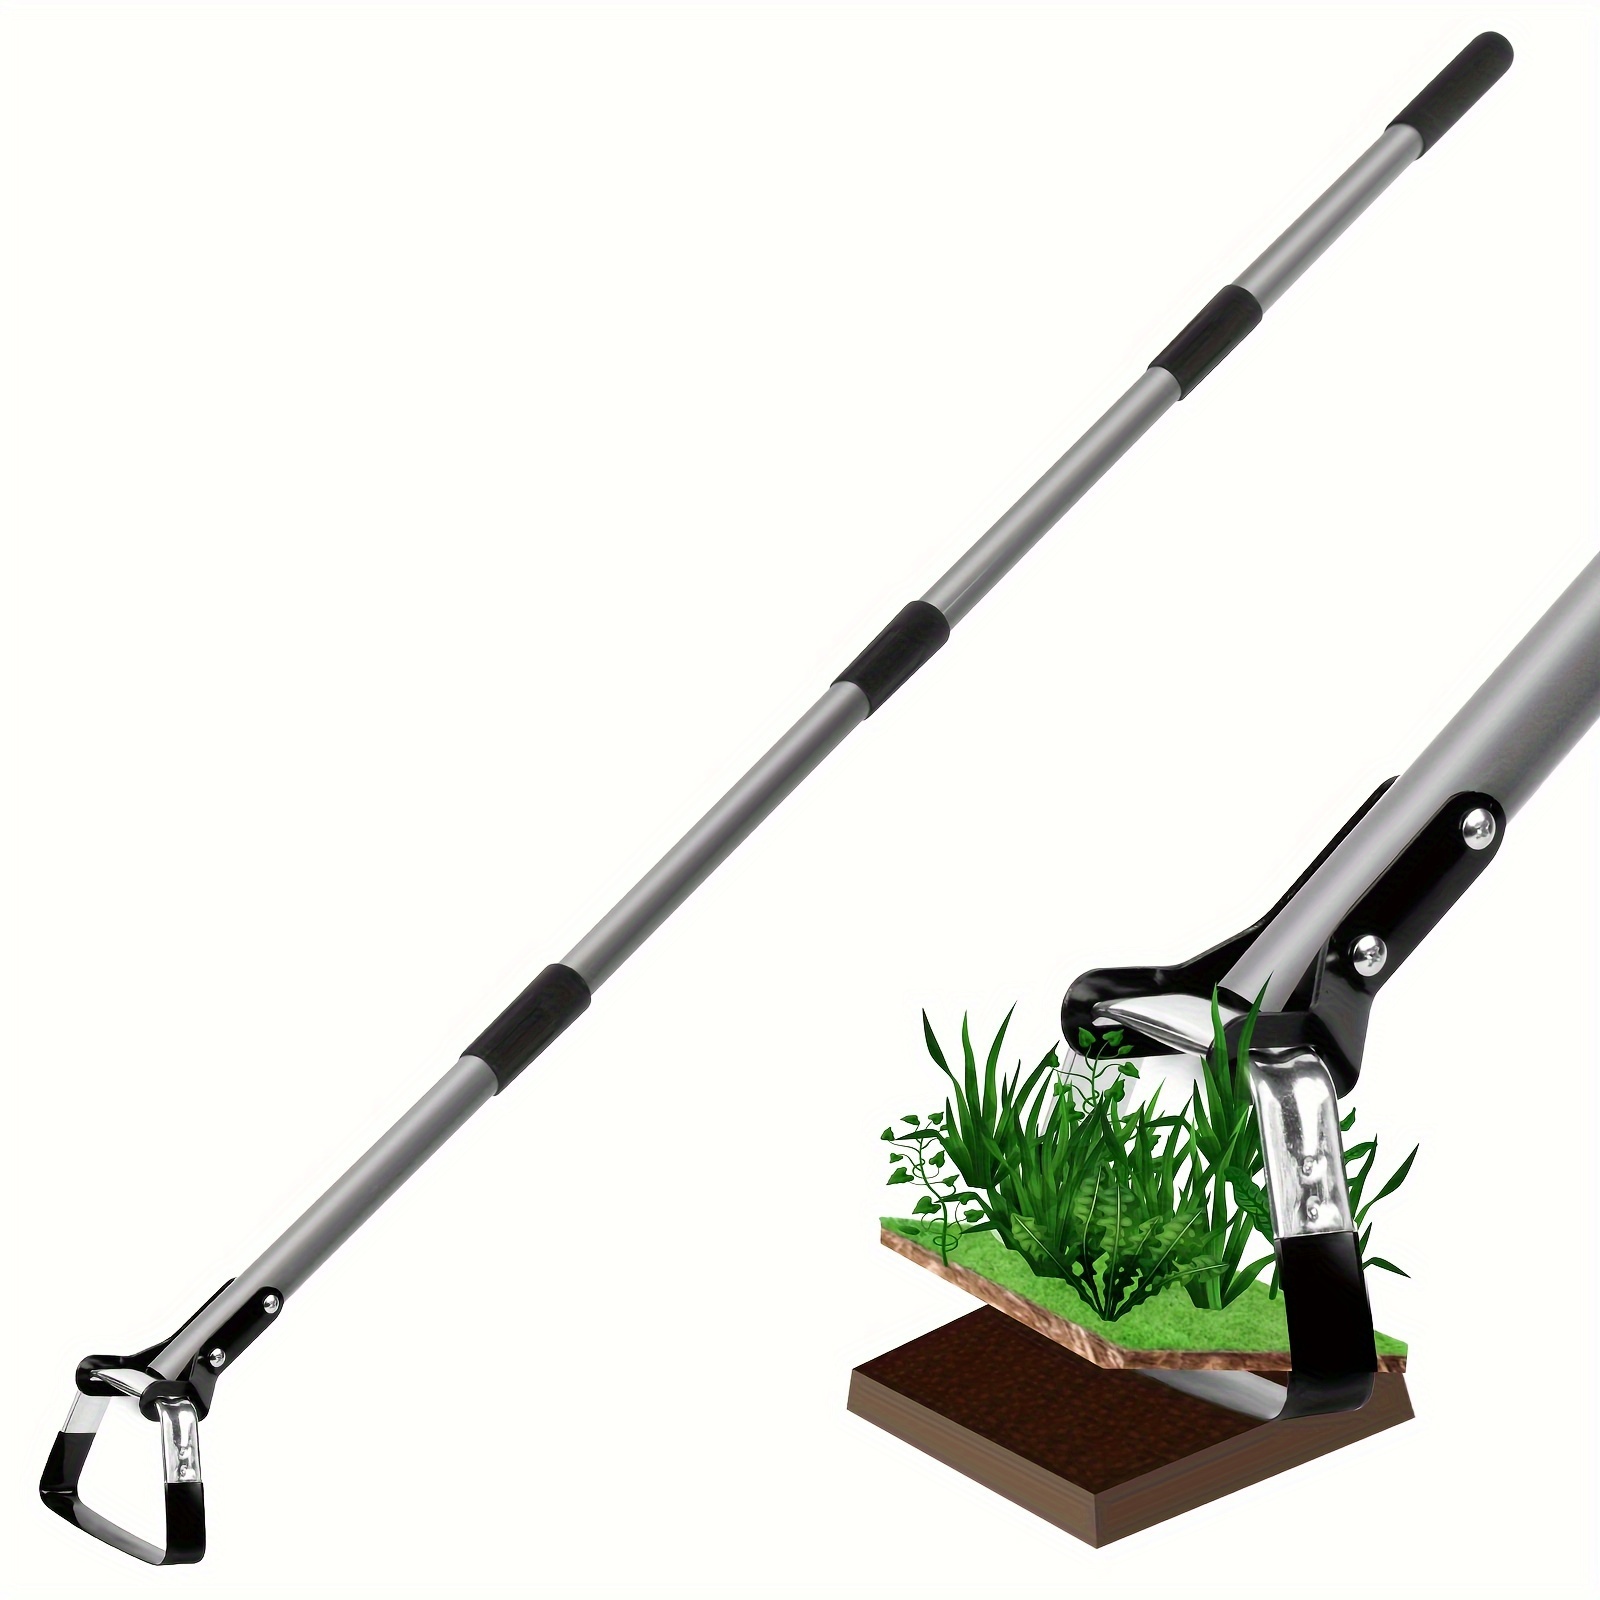 Walensee Action Hoe For Weeding Stirrup Hoe Tools For Garden Hula-Ho With Adjustable 56 Inch Scuffle Loop Hoe Gardening Weeder Cultivator, Sharp